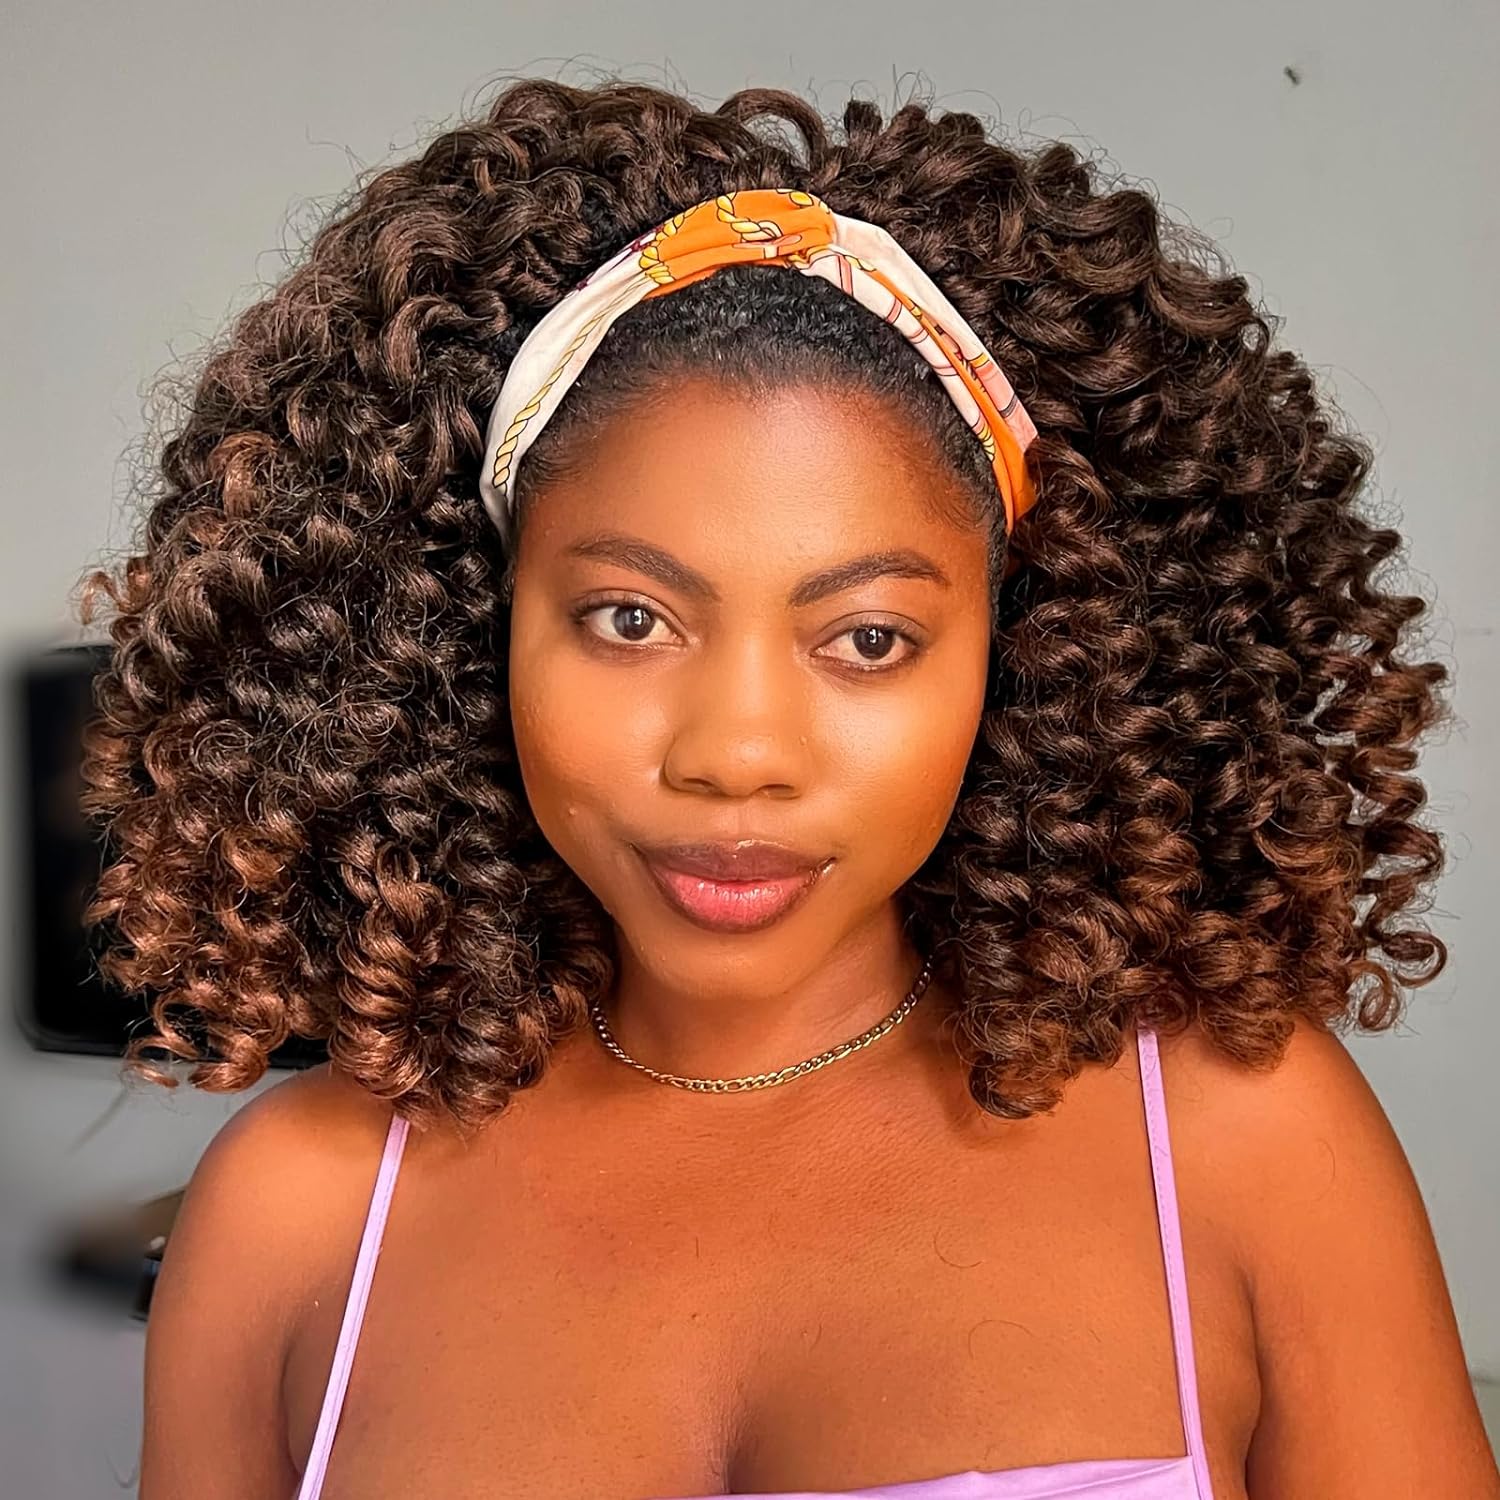 FAST SHIPPING 3-5 DAY WC | Toyotress Wand Curl Crochet Hair - 6 Inch 6 Packs Jet Black Jamaican Bounce Crochet Hair, Short Bob Curly Crochet Braids Bouncy Curls Synthetic Braiding Hair Extensions (6 Inch, 1-6P)